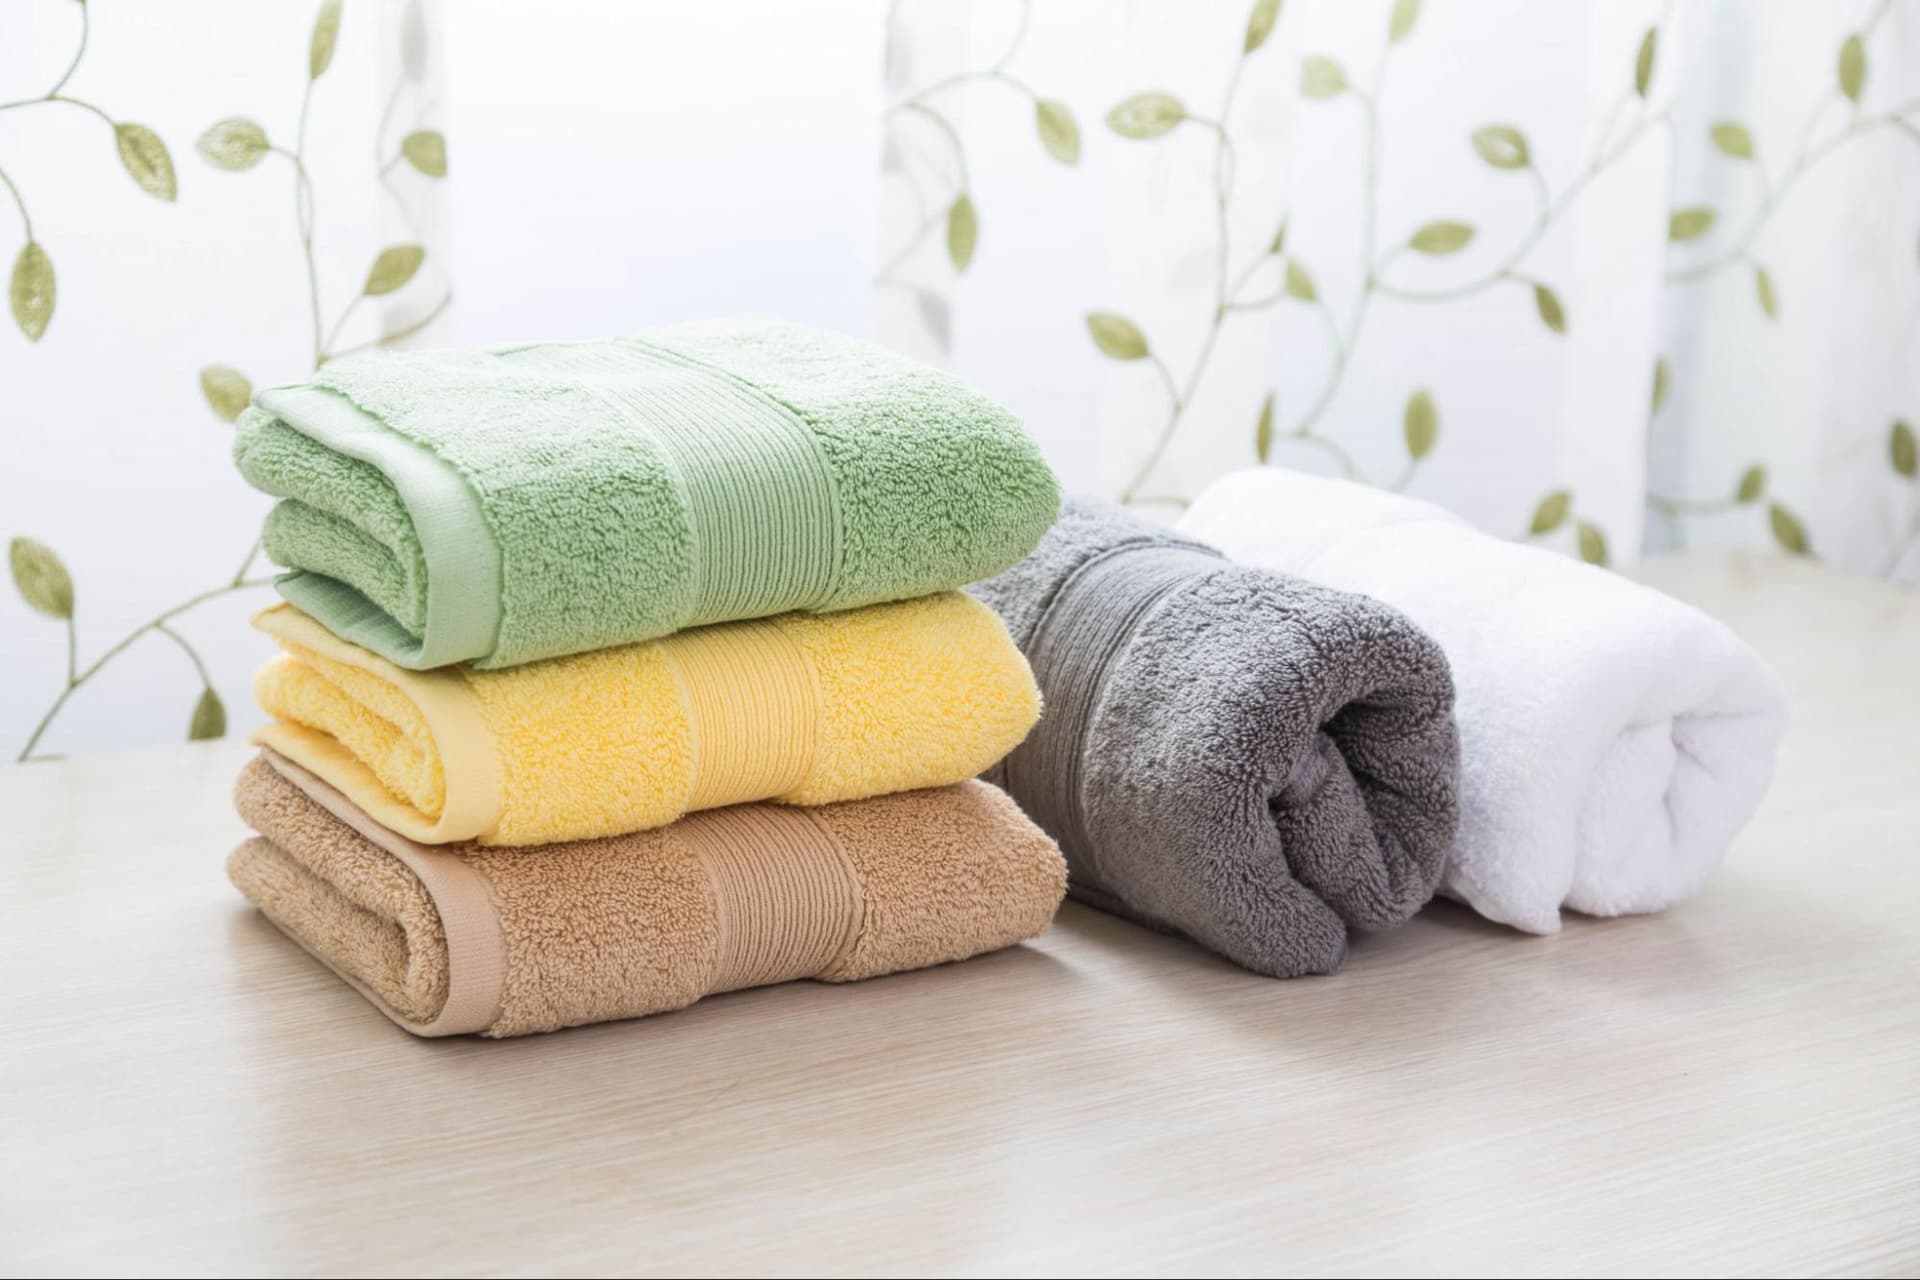 How to Pick the Best Luxury Bath Towels to Match Your Bathroom Design